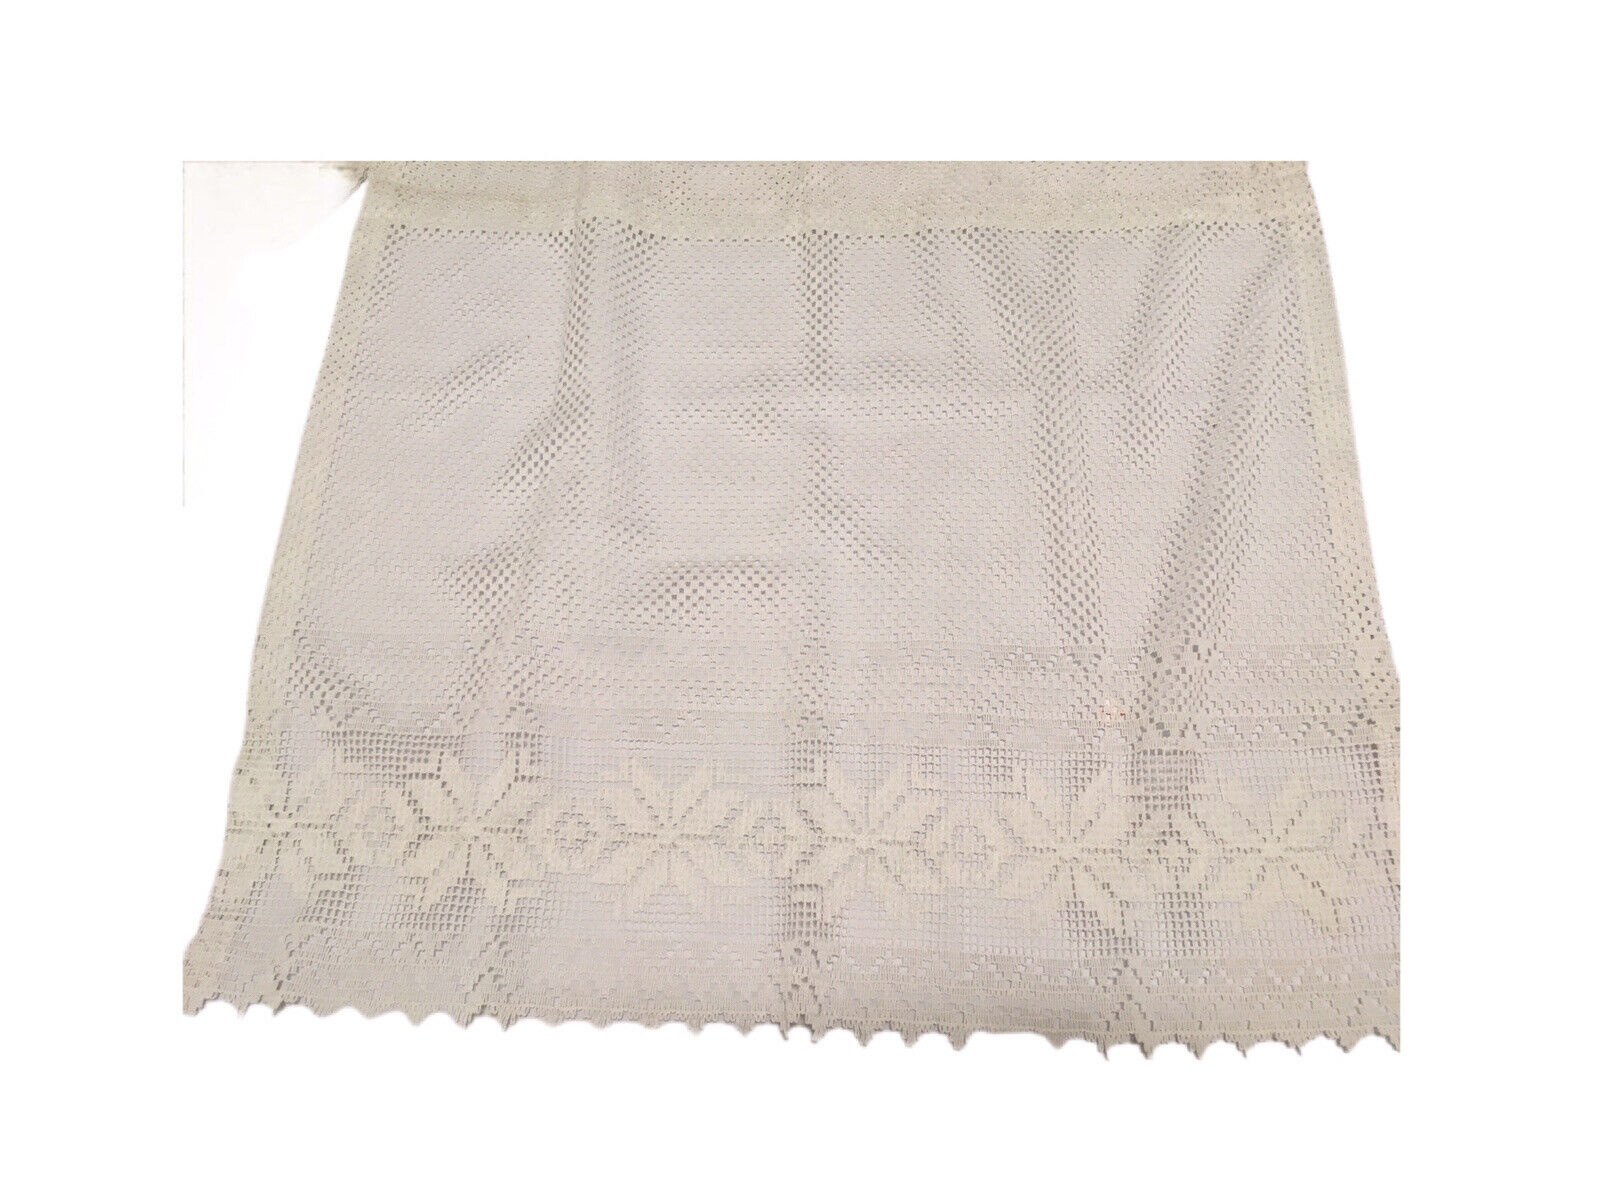 Vintage 2 curtain sections white open weave 23x27 in Pocket For Rod